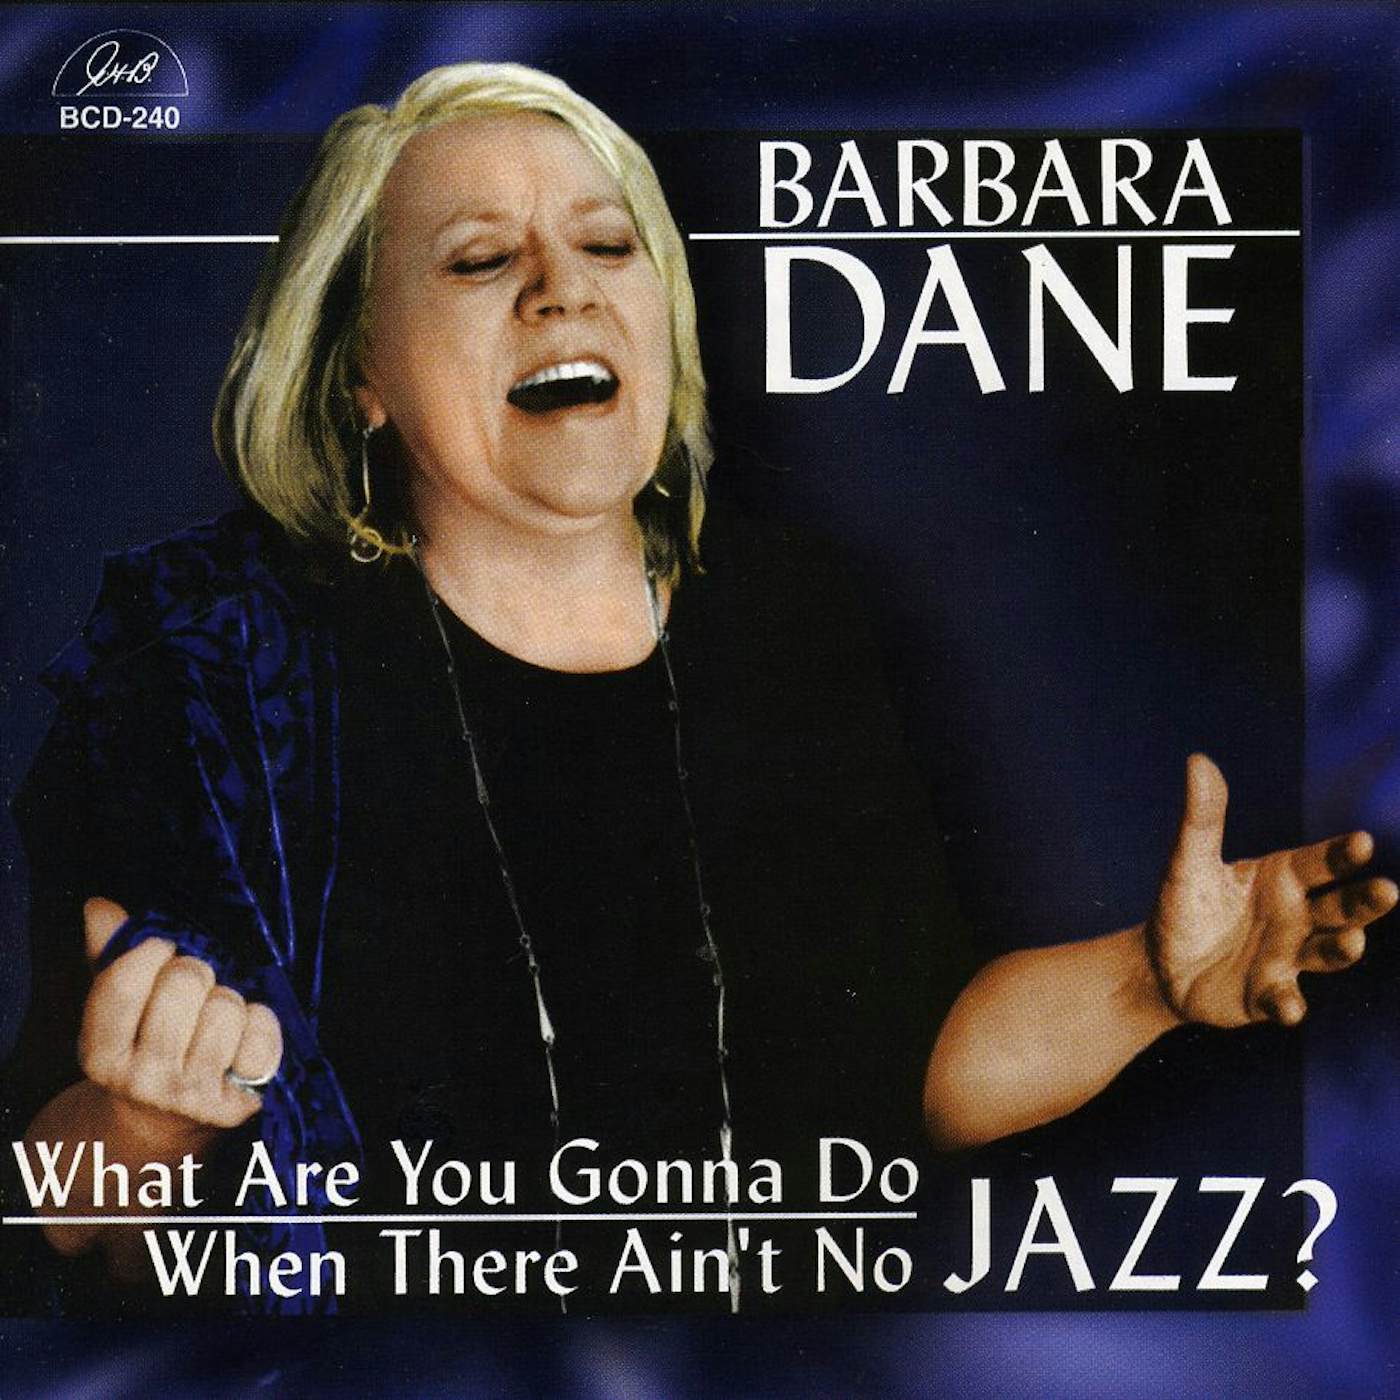 Barbara Dane WHAT ARE YOU GONNA DO WHEN THERE AIN'T NO JAZZ CD